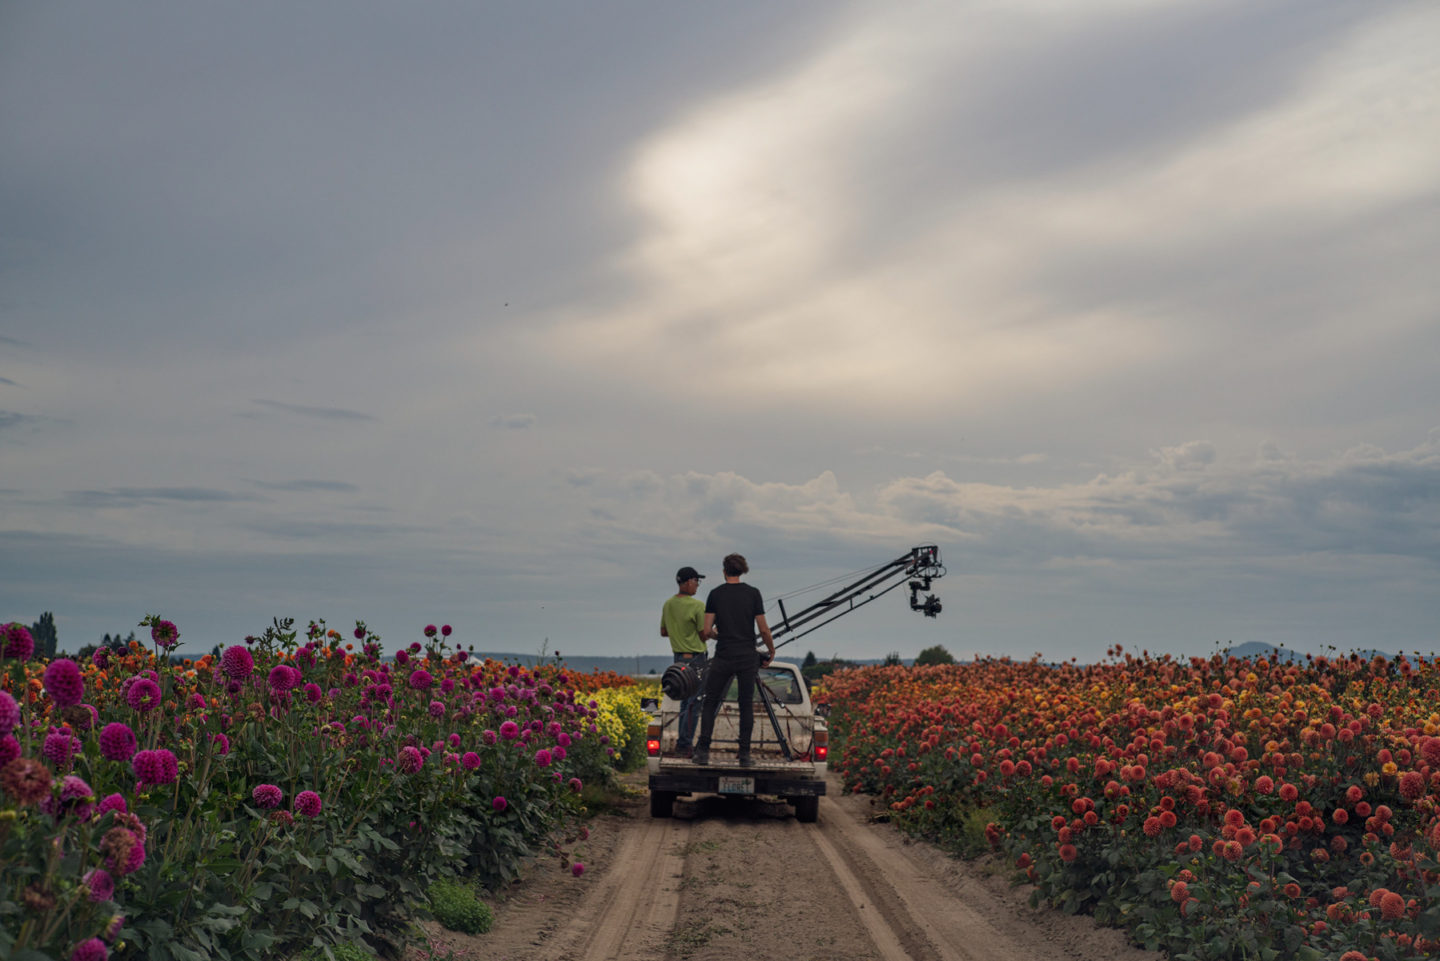 Filming the dahlia field for the Floret documentary on new Magnolia network 